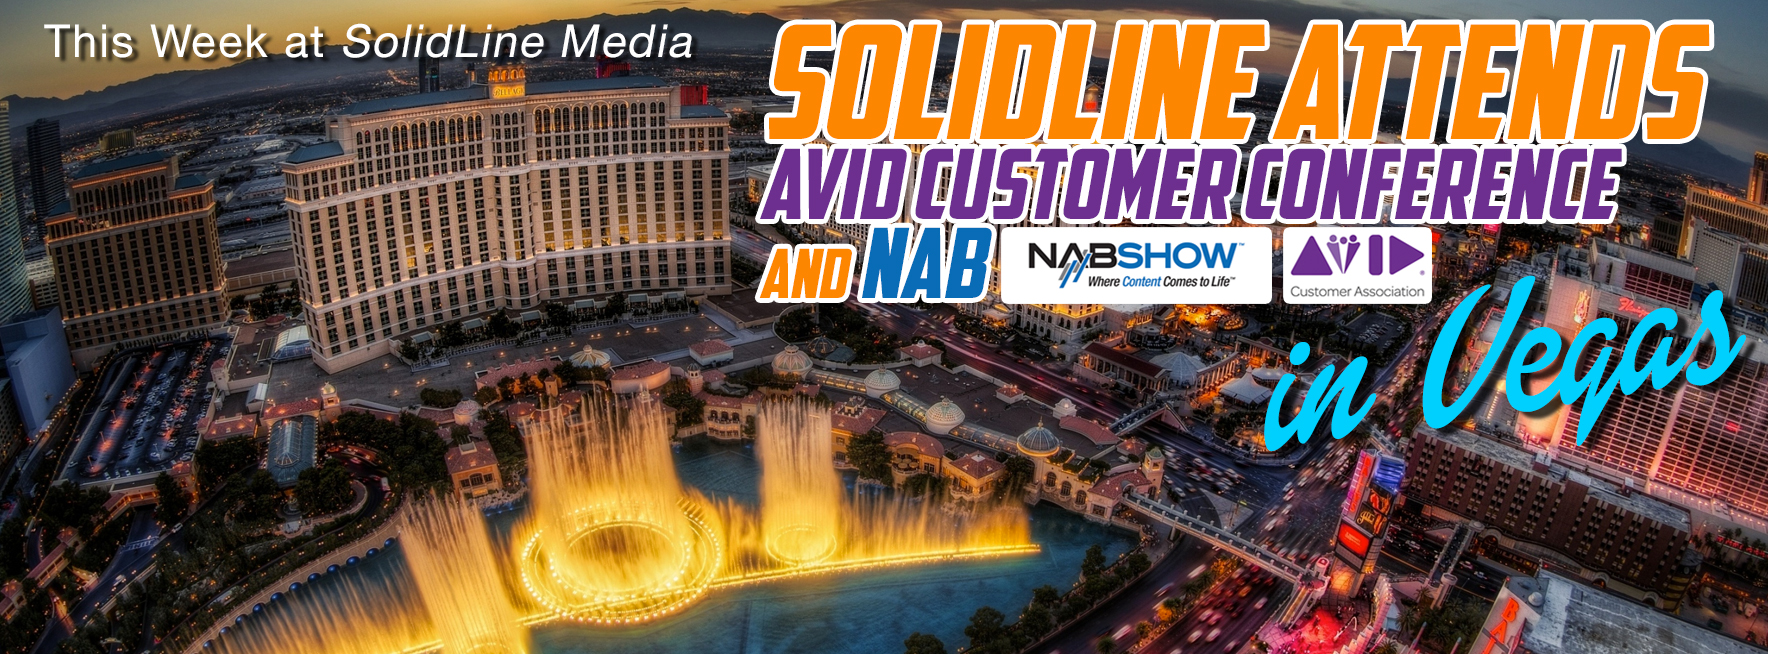 Solidline attends avid customer confrence and nab in Vegas